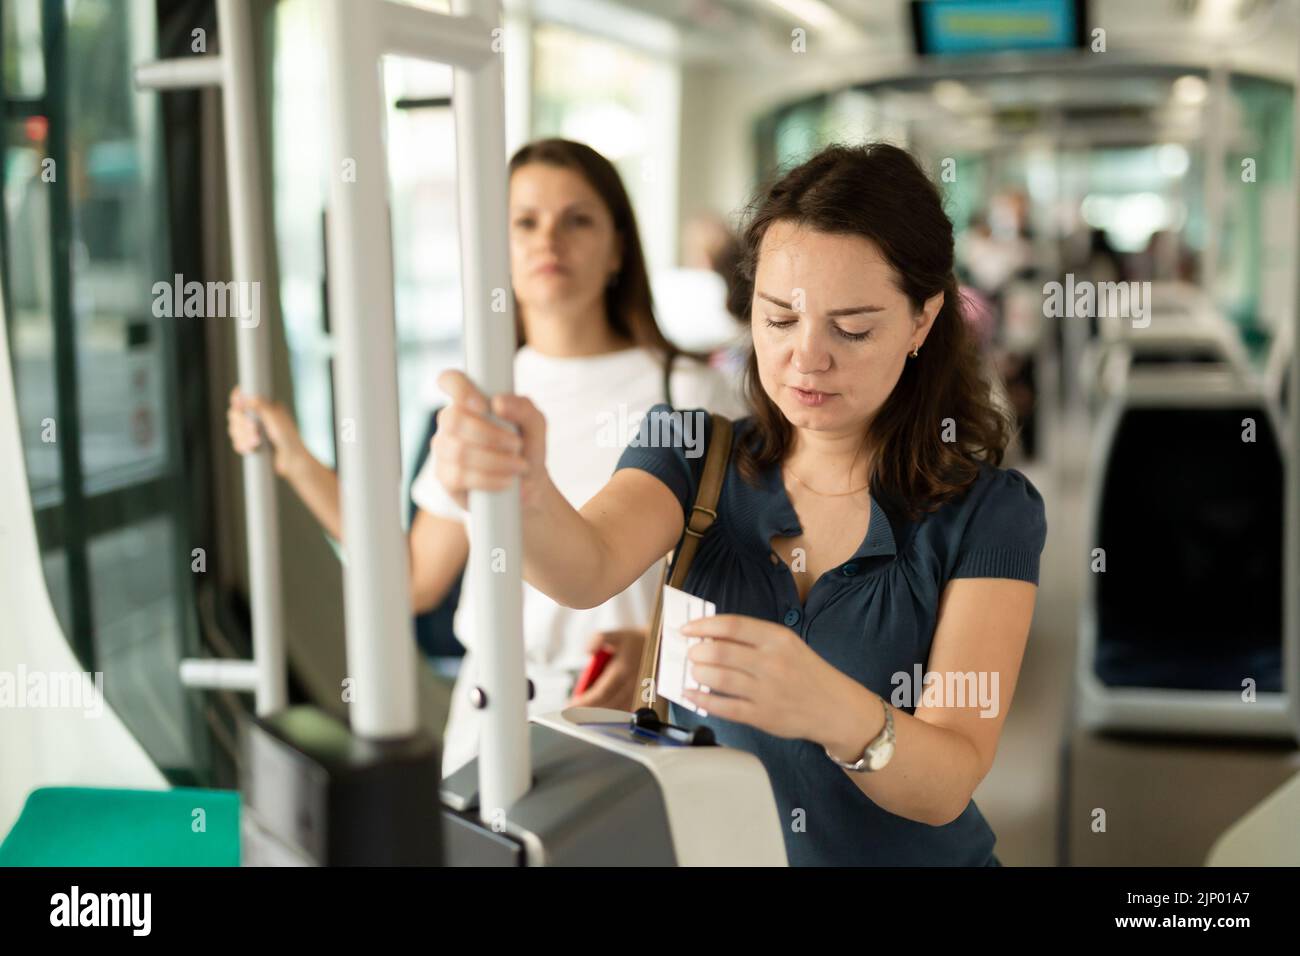 Woman validating ticket in public transport Stock Photo